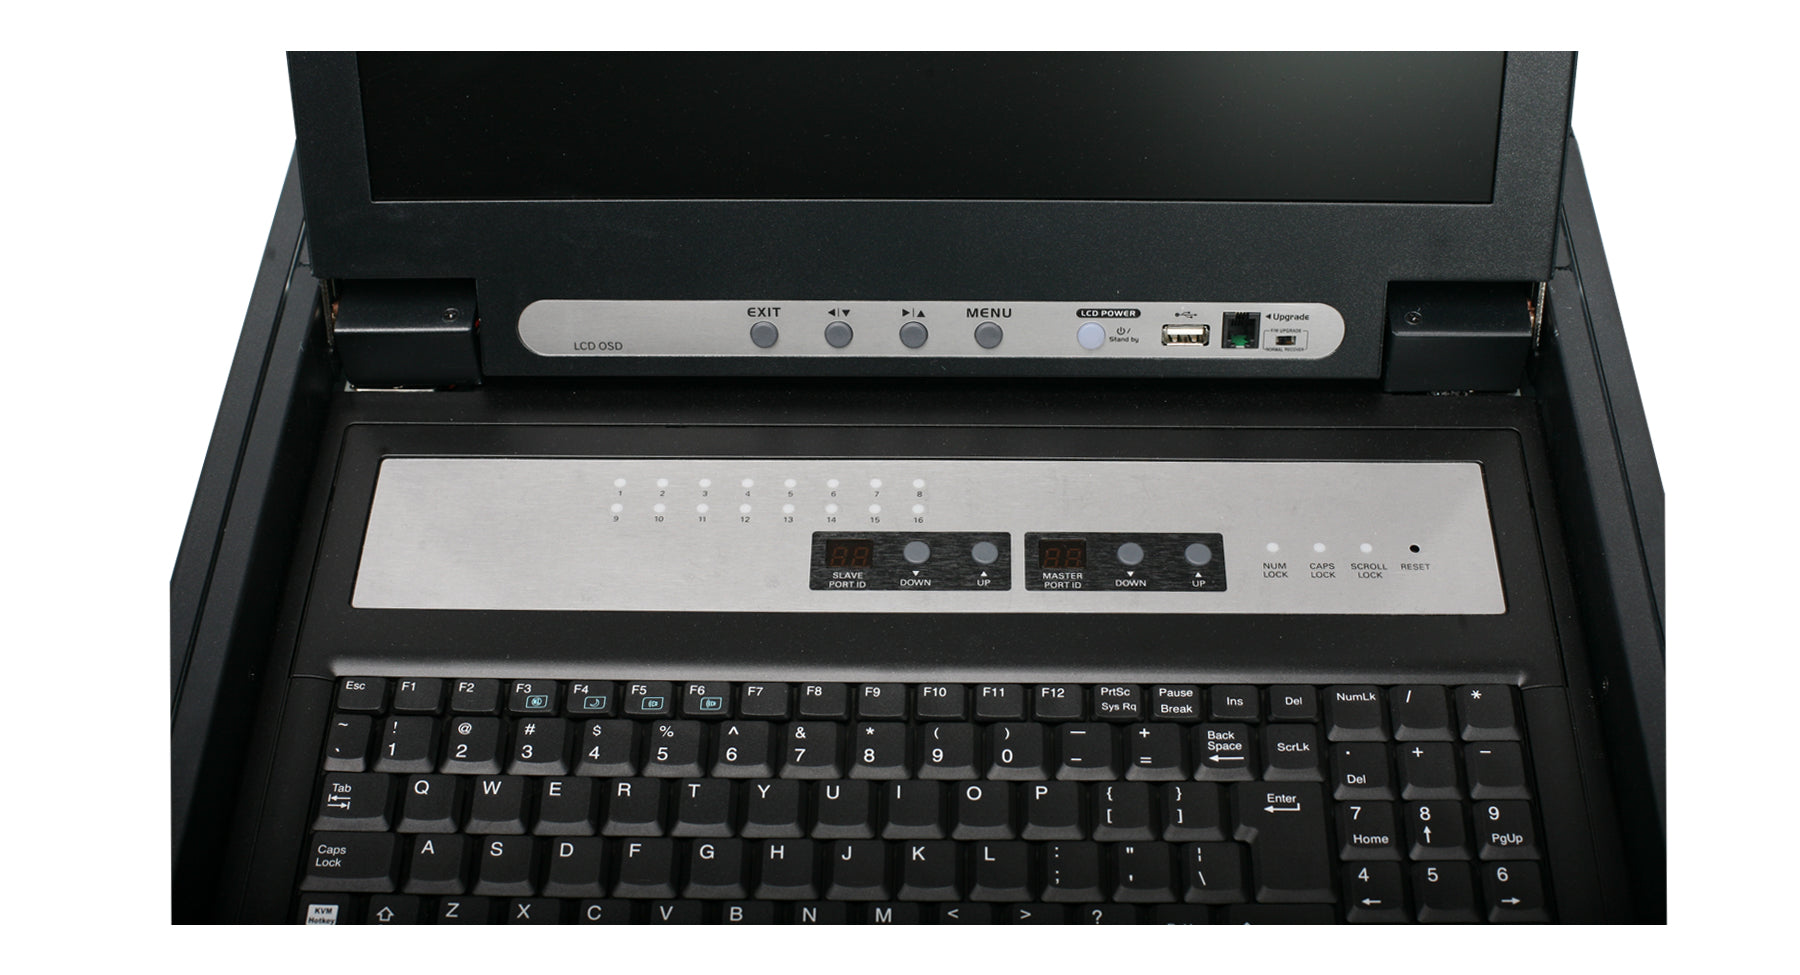 16-Port LCD Combo KVM Switch with PS/2 KVM Cables